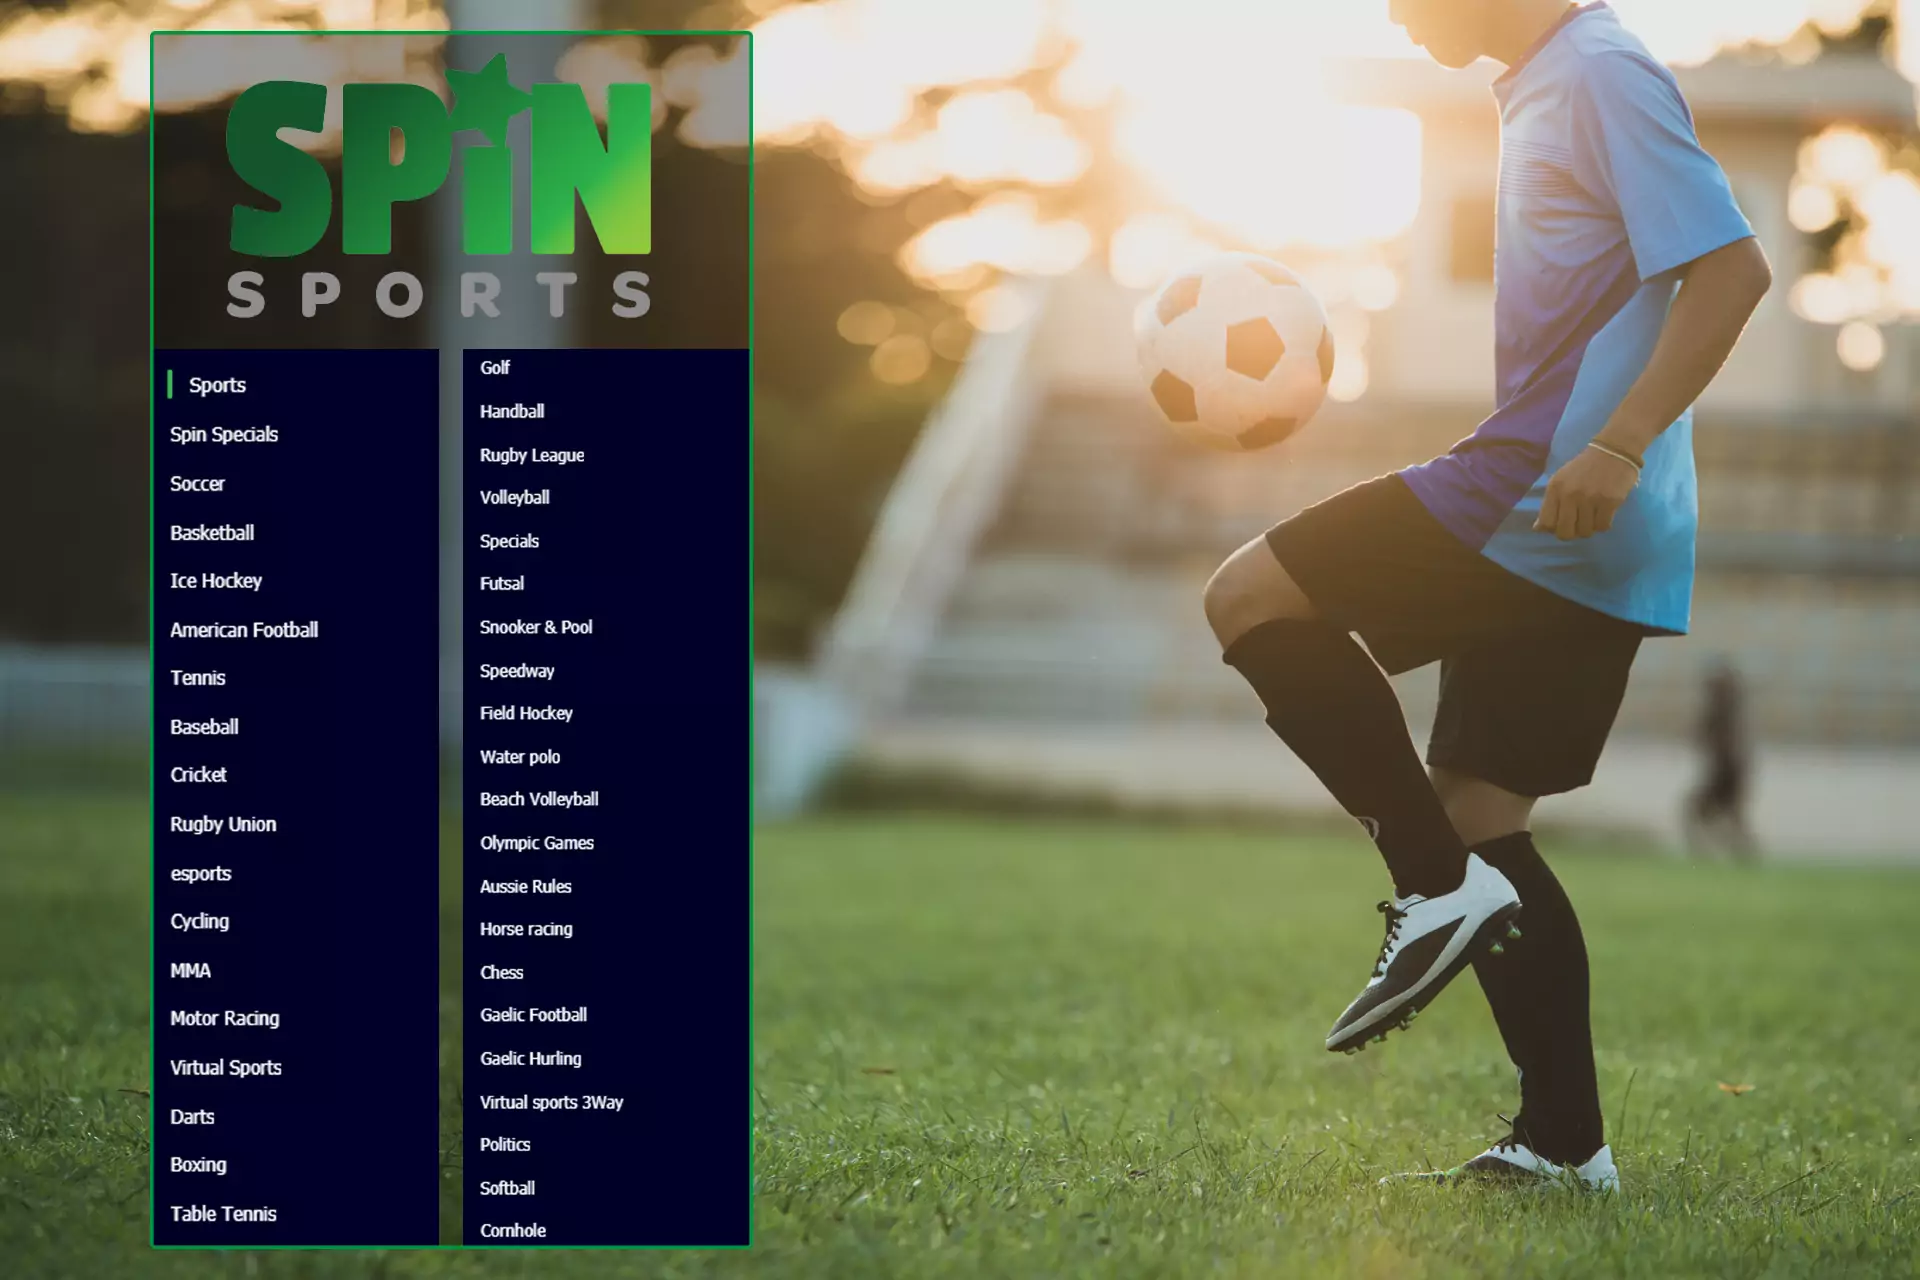 Spin Sports accepts bets for almost every kind of sport.